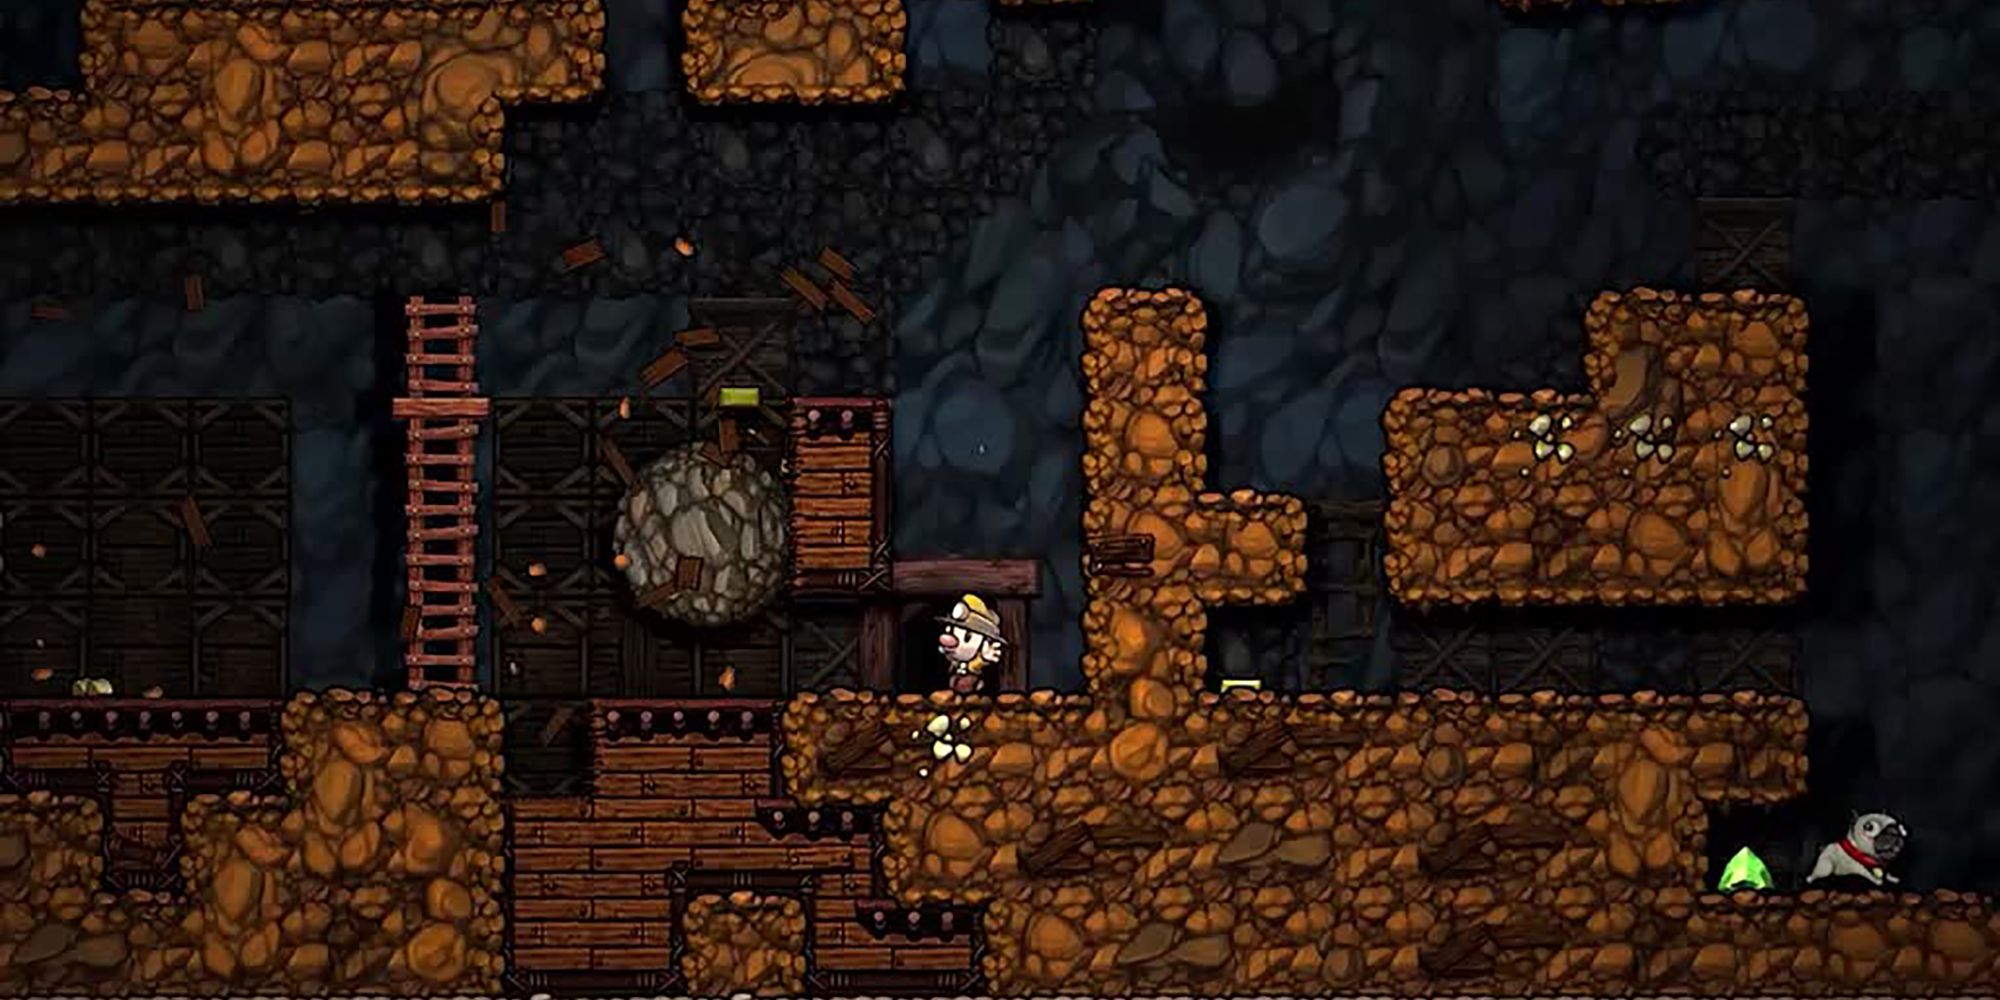 A gameplay screenshot from Spelunky